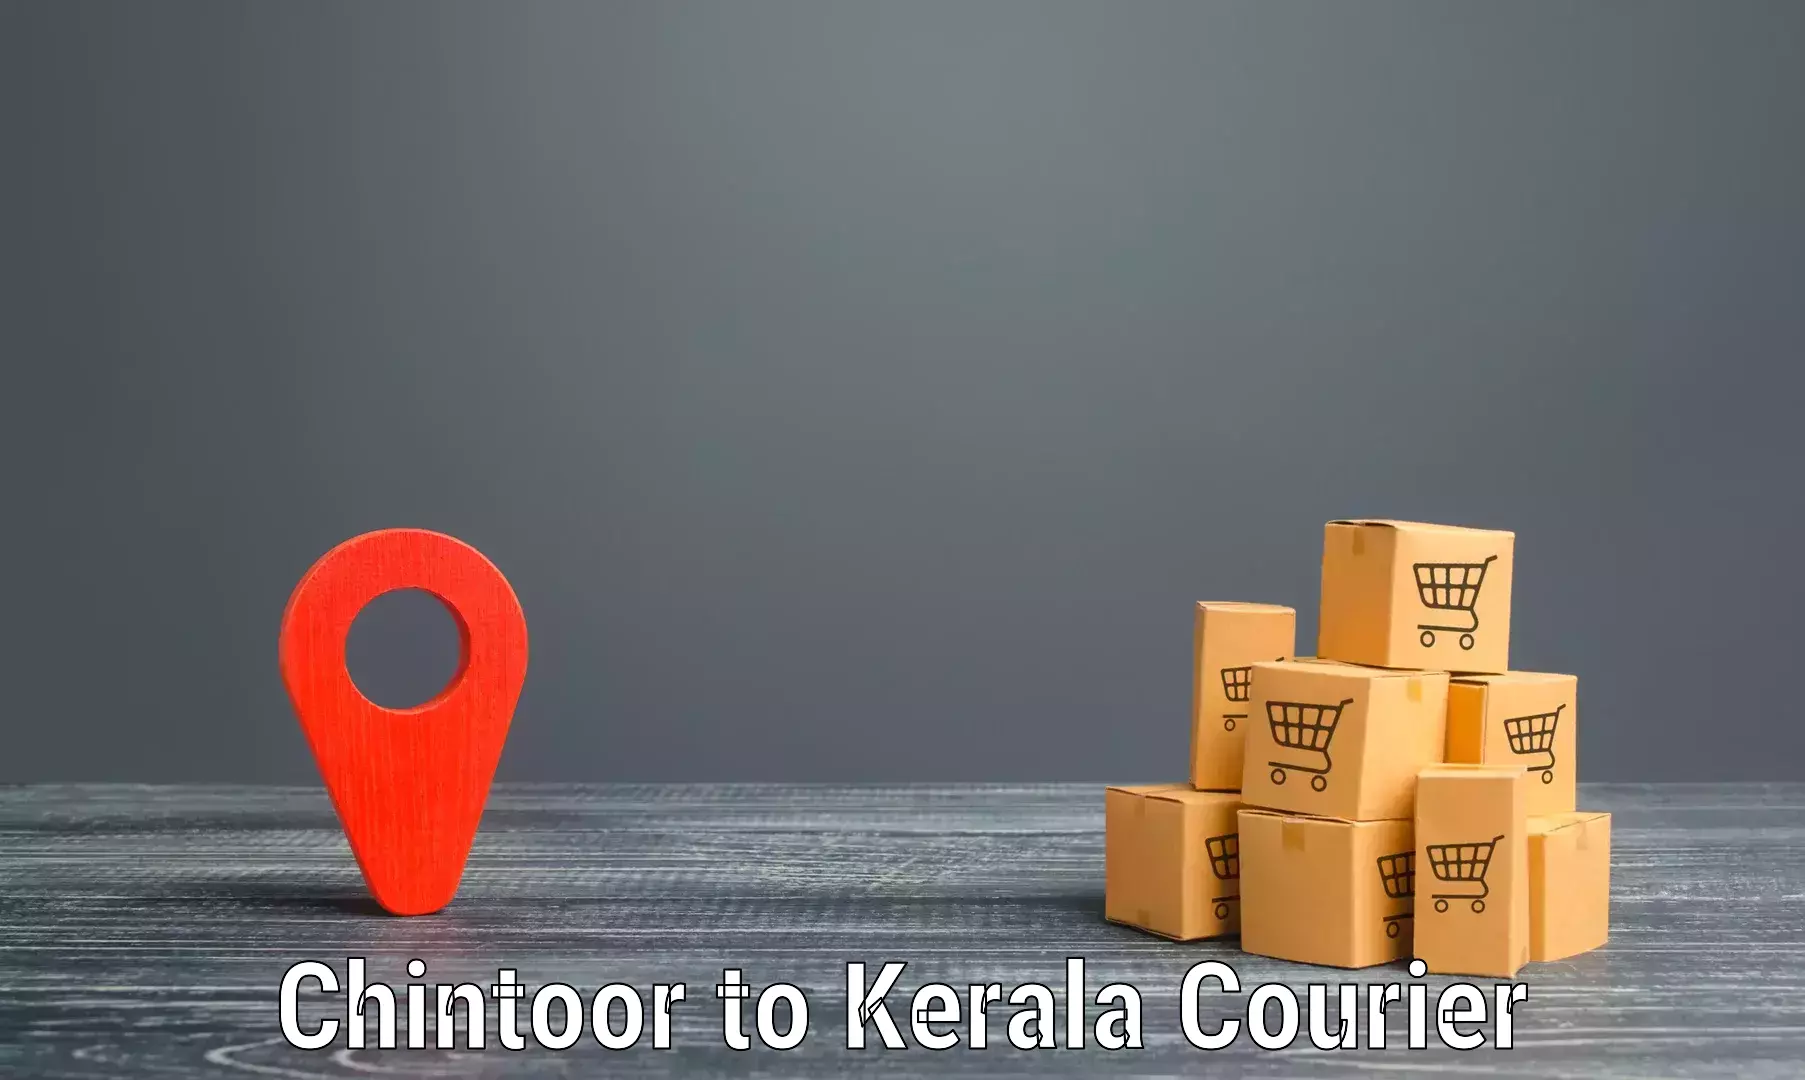 Speedy delivery service Chintoor to Kottayam